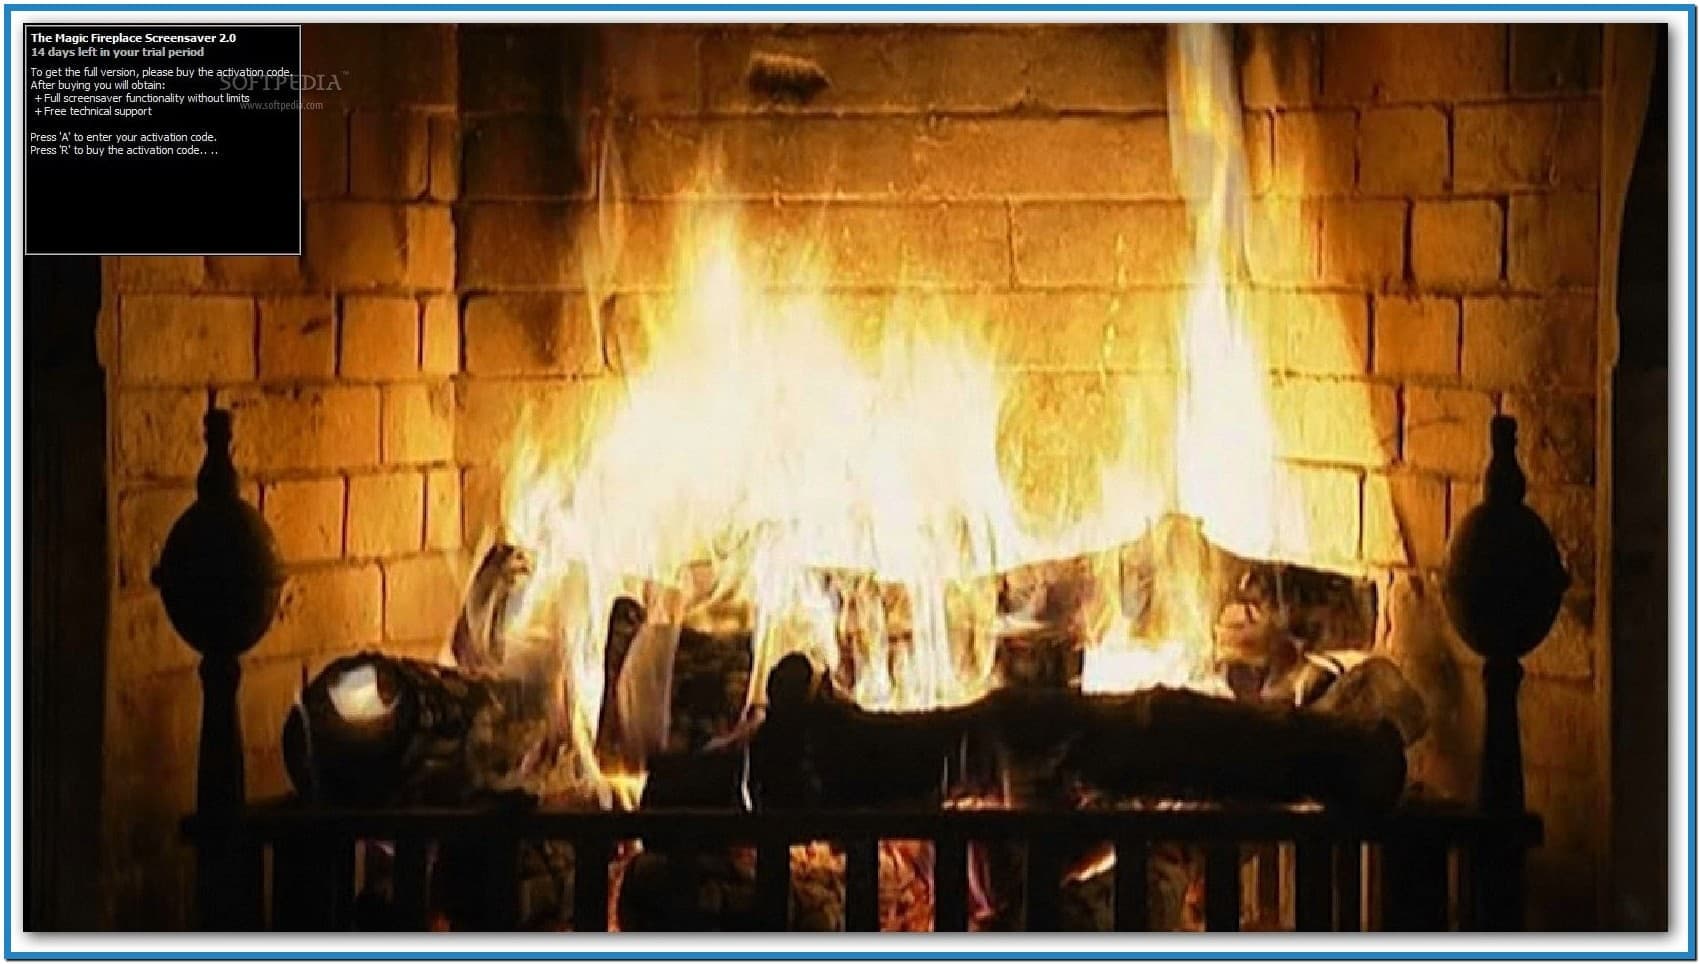 fireplace 3d screensaver and animated wallpaper